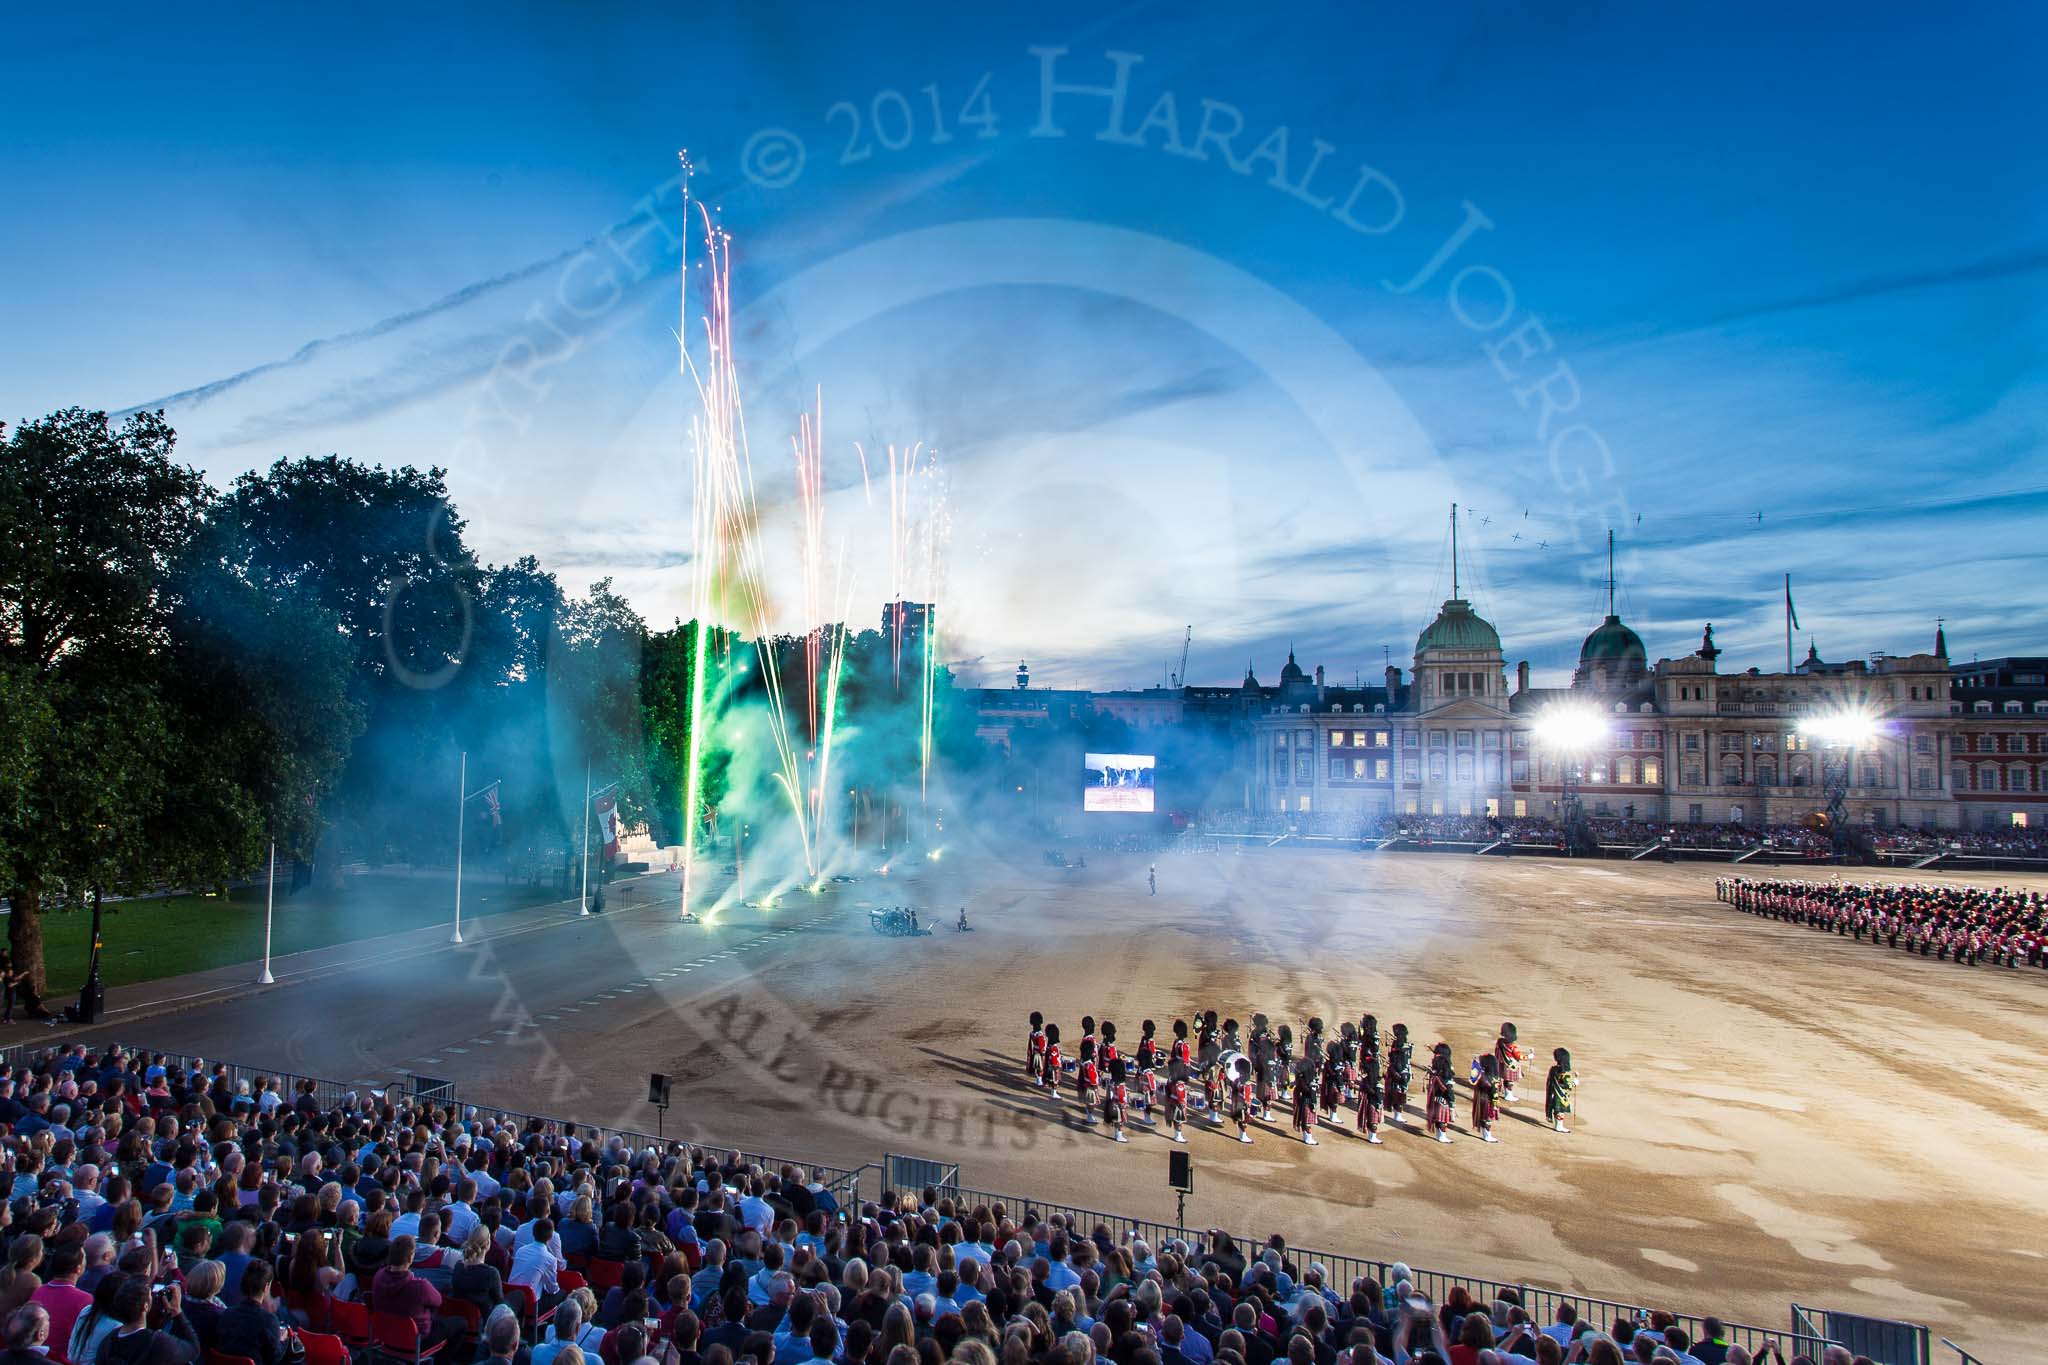 Beating Retreat 2014.
Horse Guards Parade, Westminster,
London SW1A,

United Kingdom,
on 11 June 2014 at 21:41, image #377